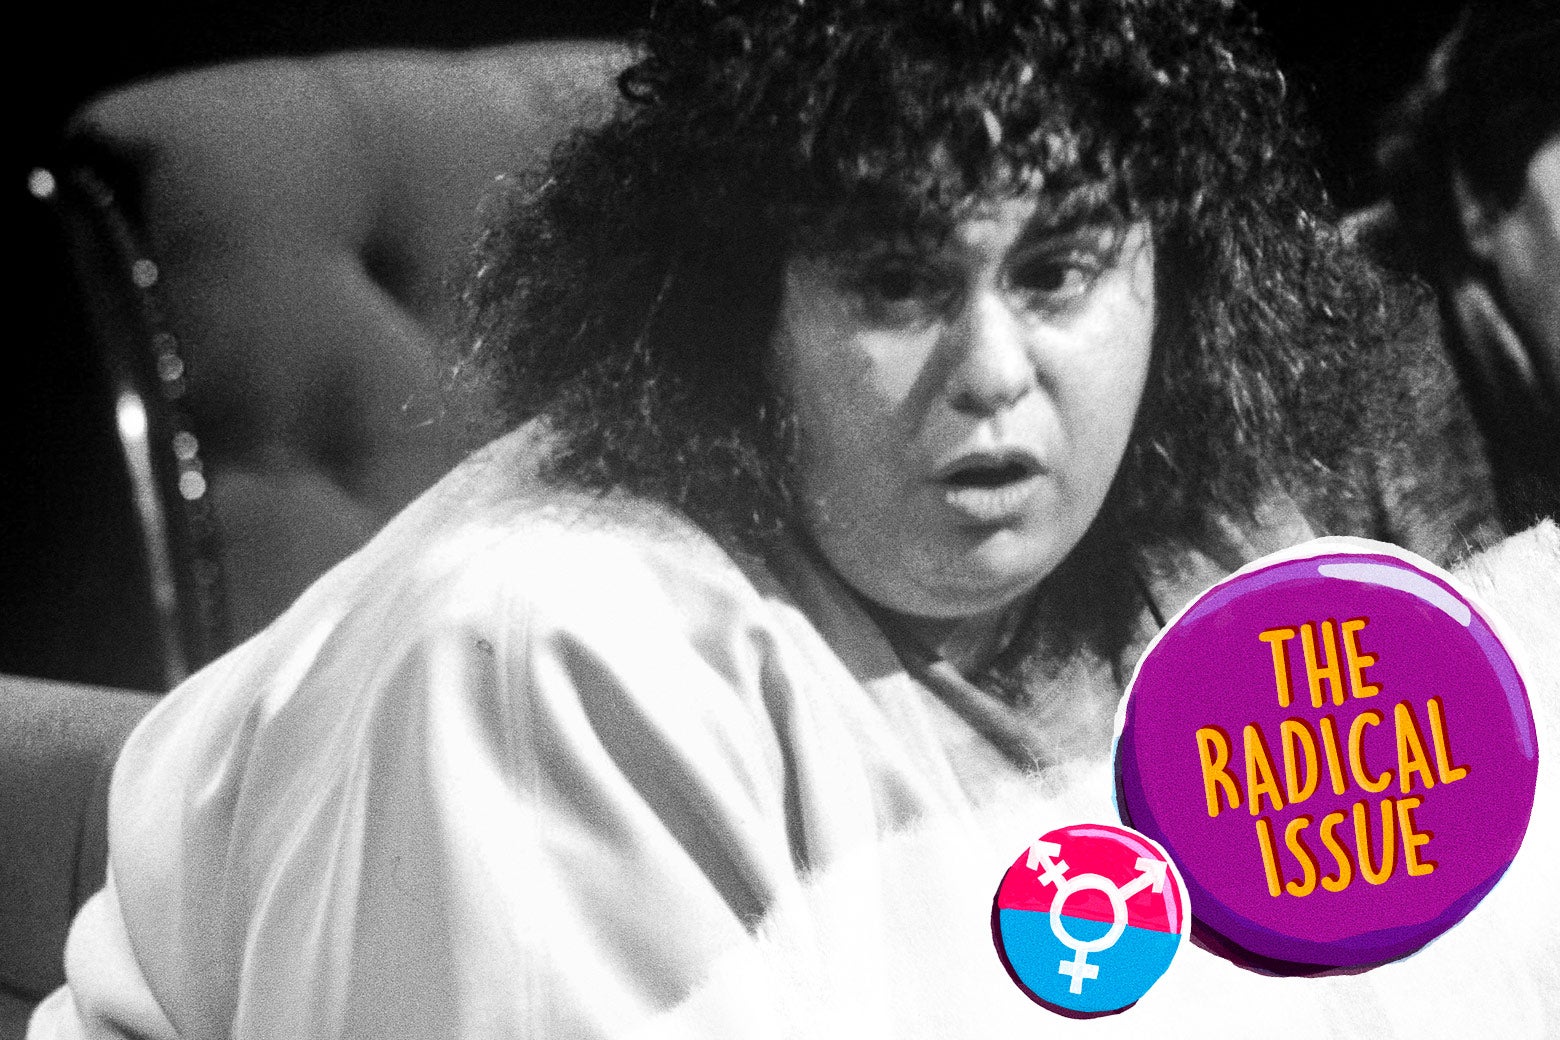 Andrea Dworkin appearing on British television discussion program After Dark